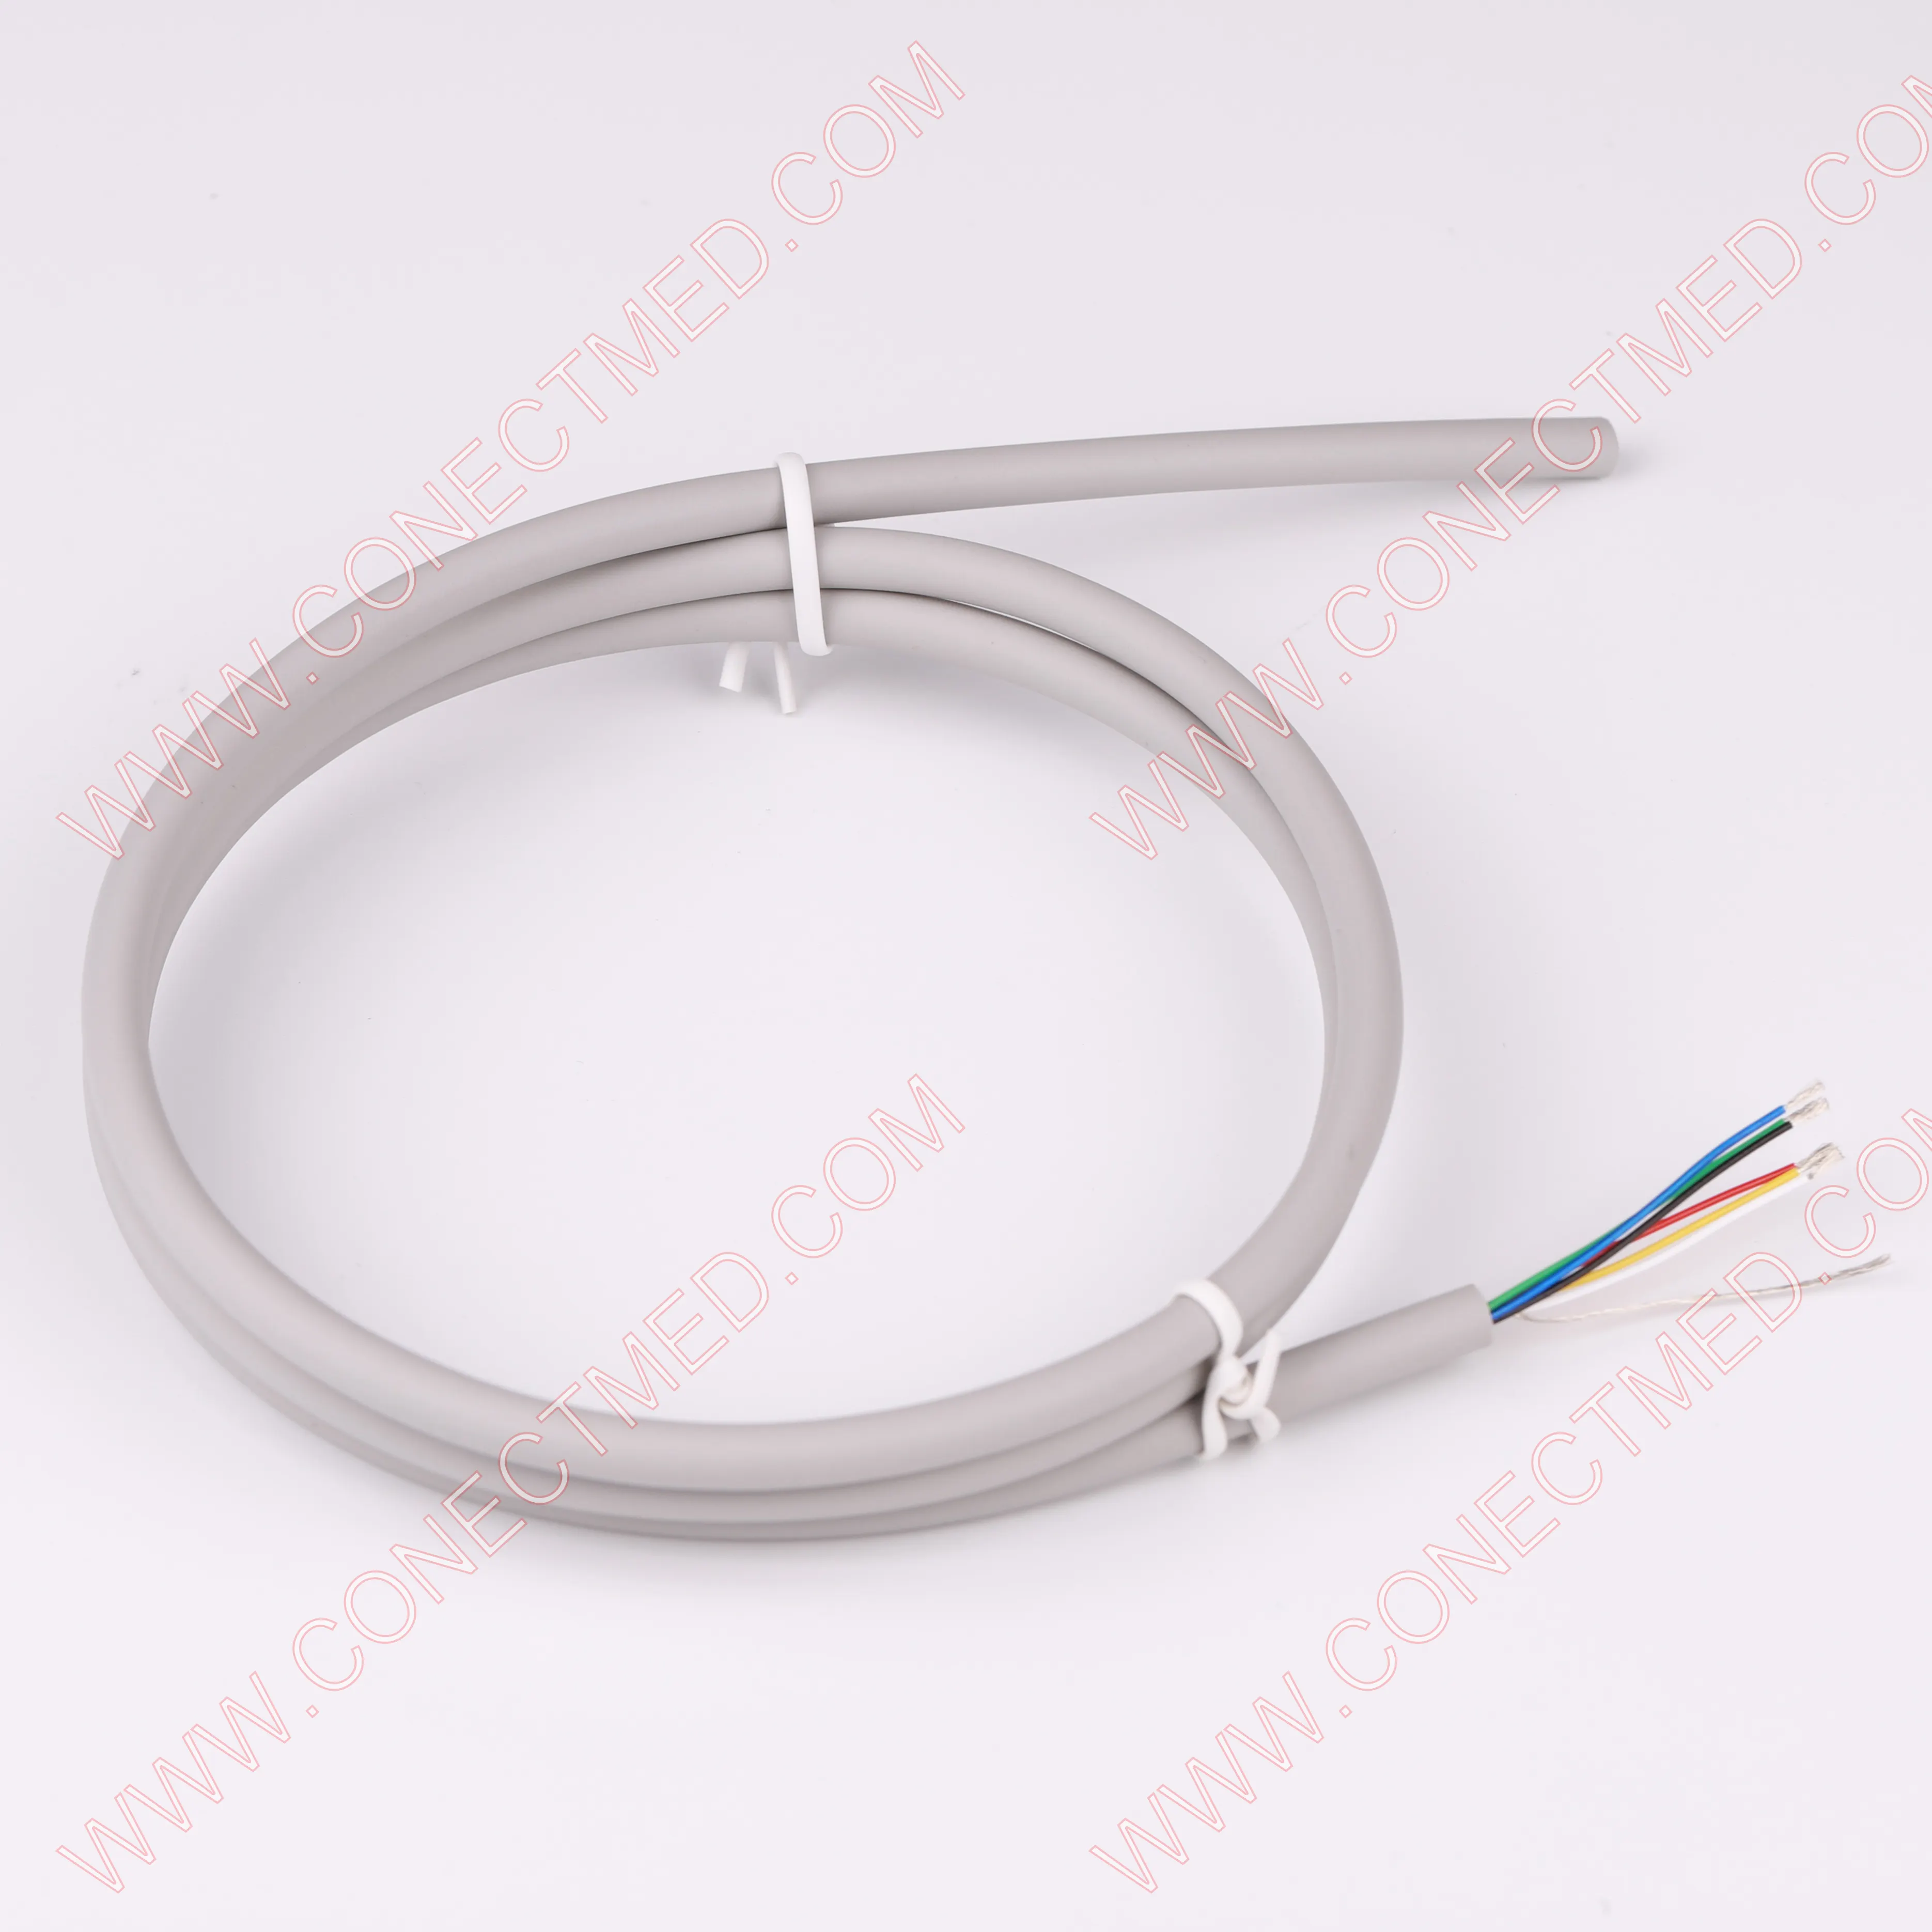 High quality compatible nihon kohden medical cable factory manufacture ecg cable with 10 lead 6 lead 12 lead wire